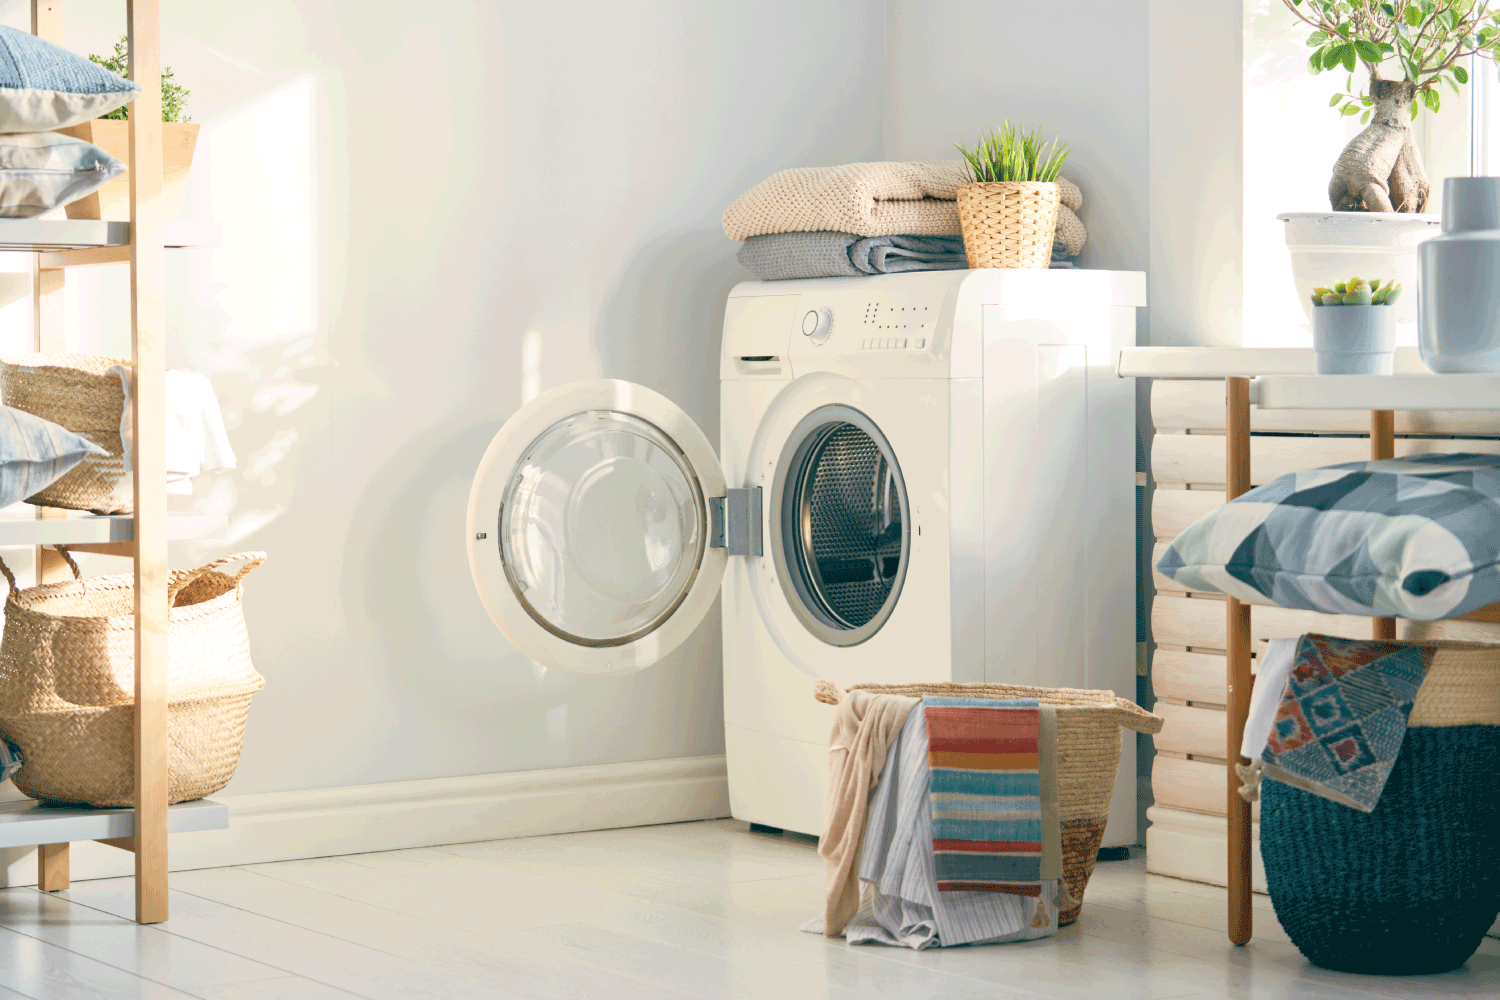 Laundry room with a open hatch washing machine